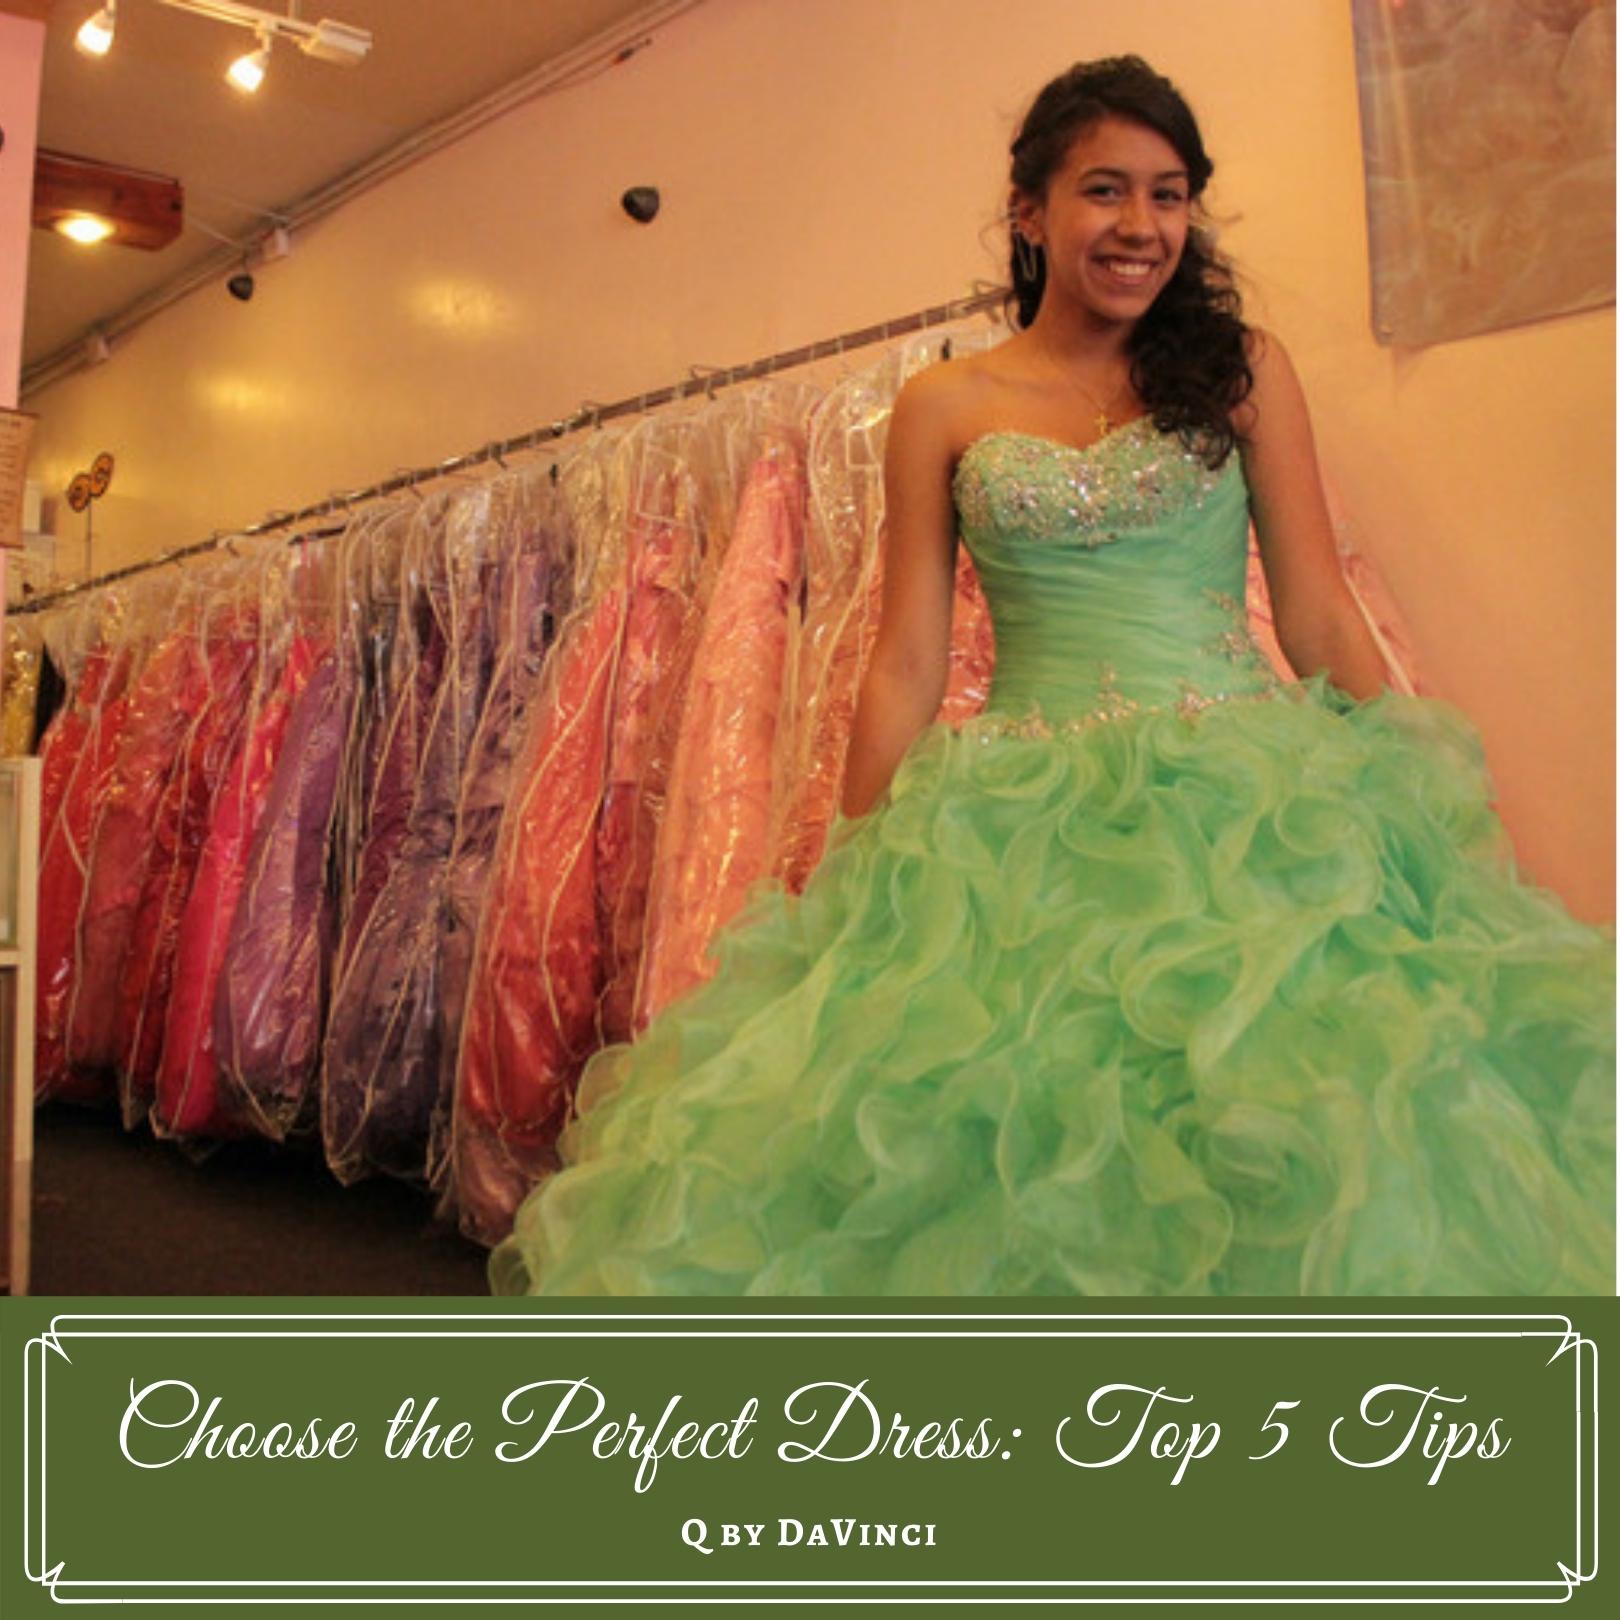 How to Choose Your Prom Dress Color According to Skin Tone